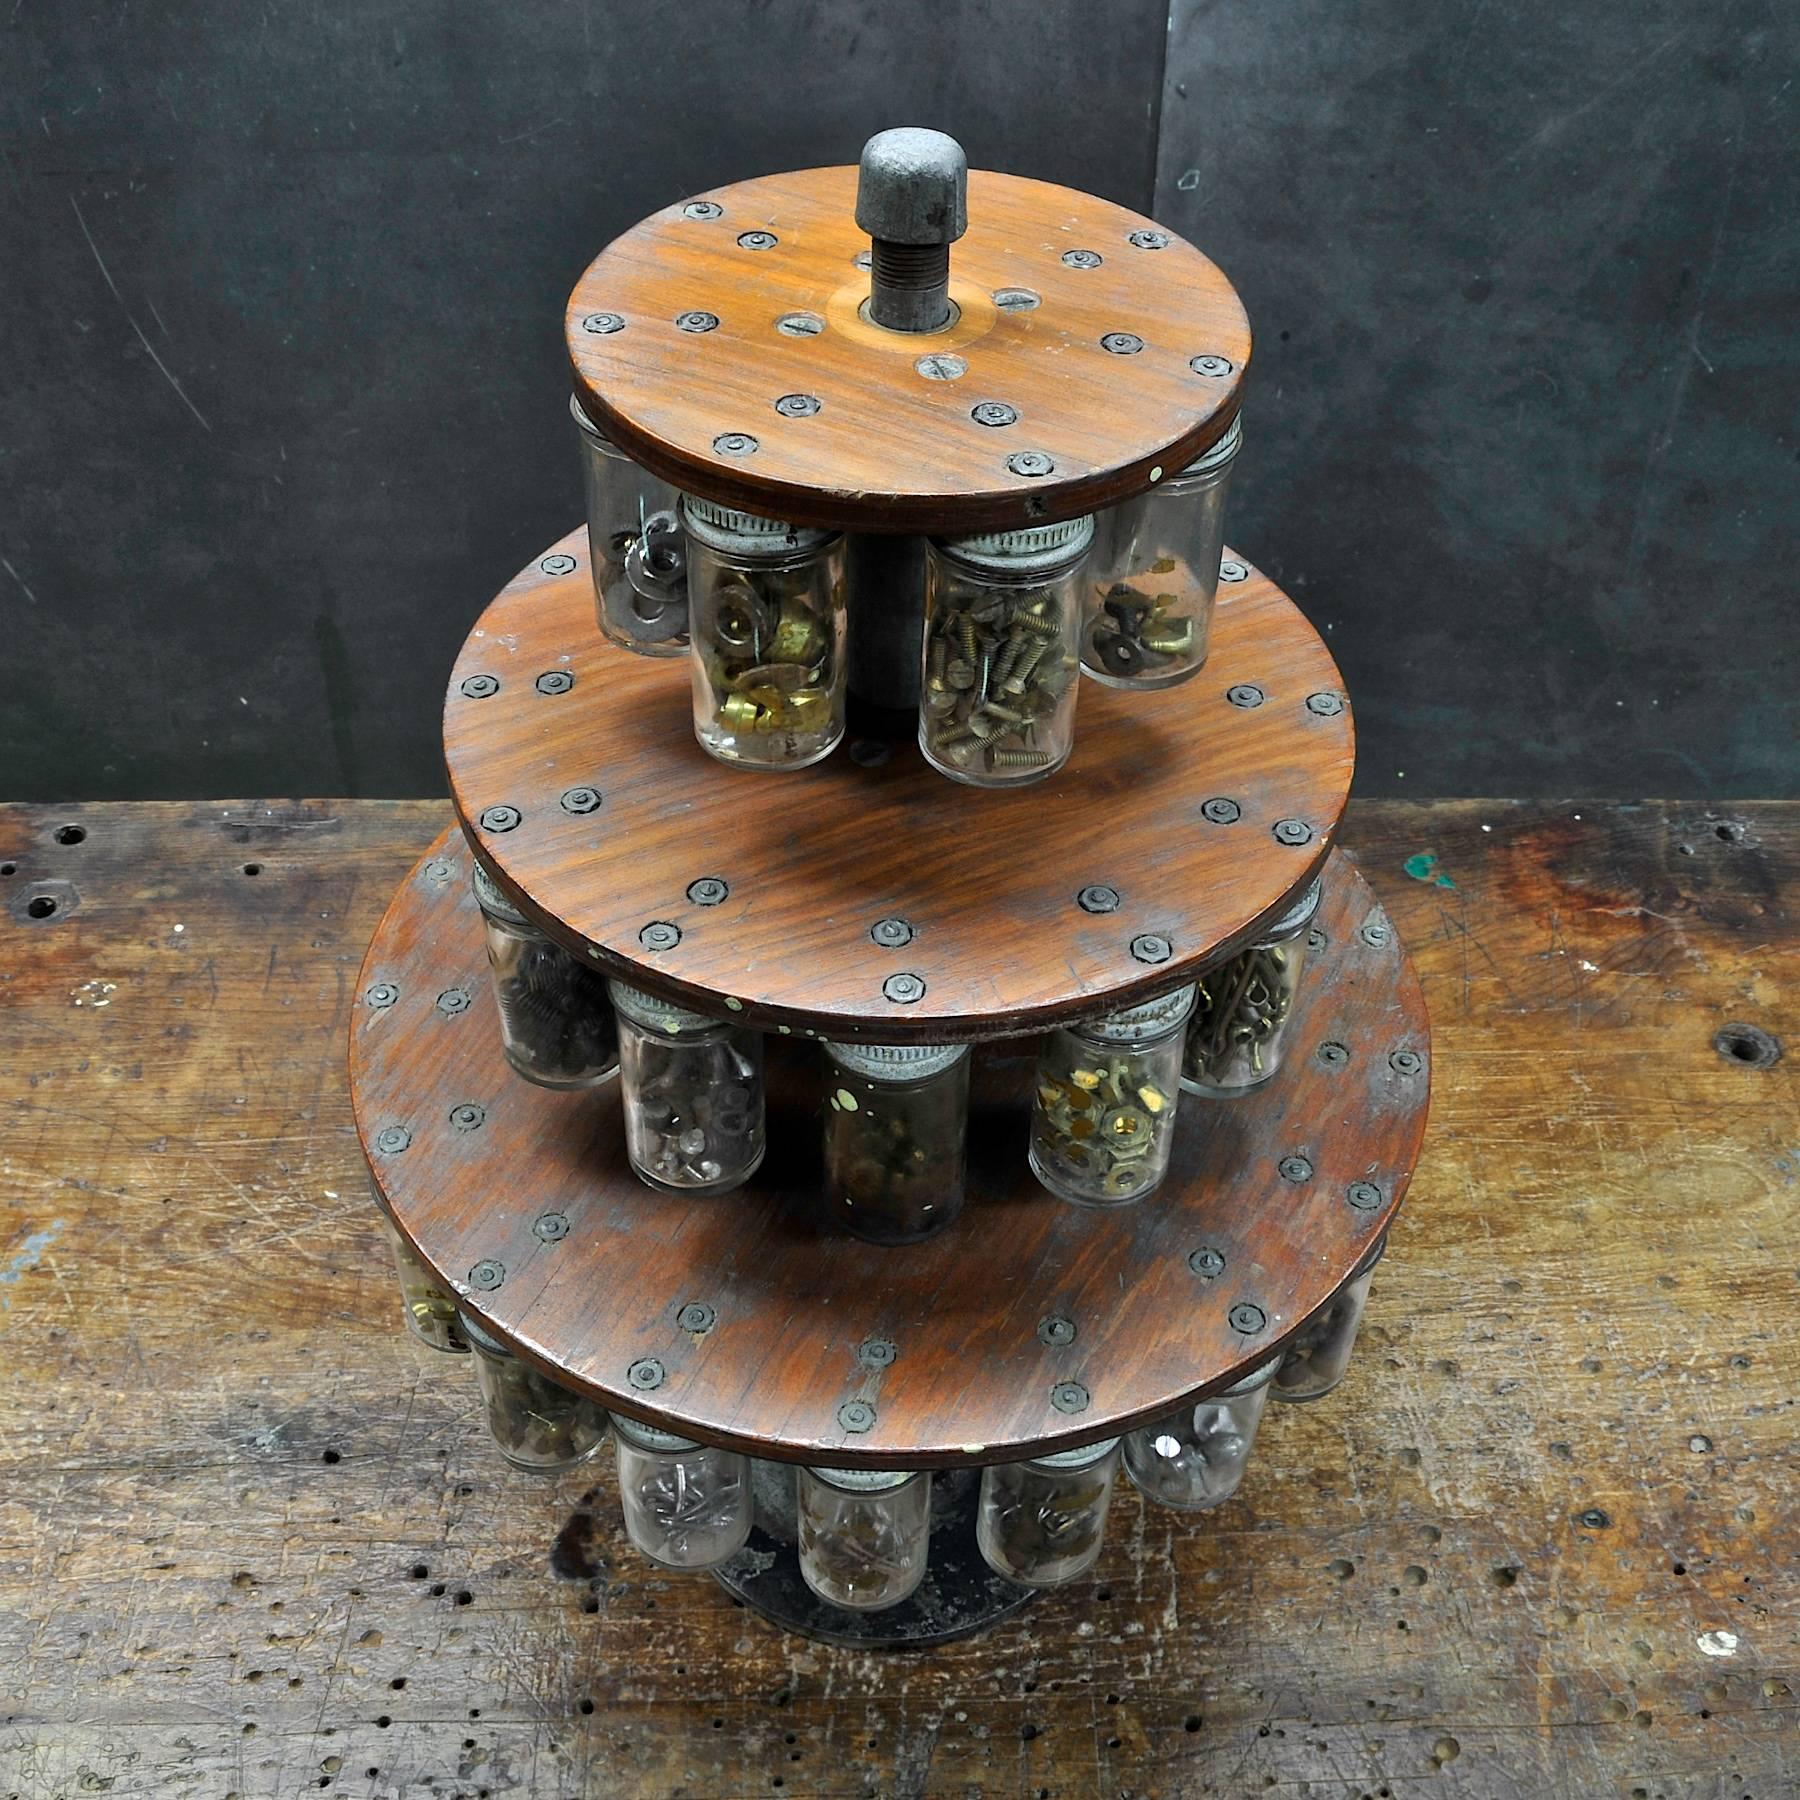 Machine-Made Old American Craftsmans Workshop Odds and Ends Hardware Carousel Tree